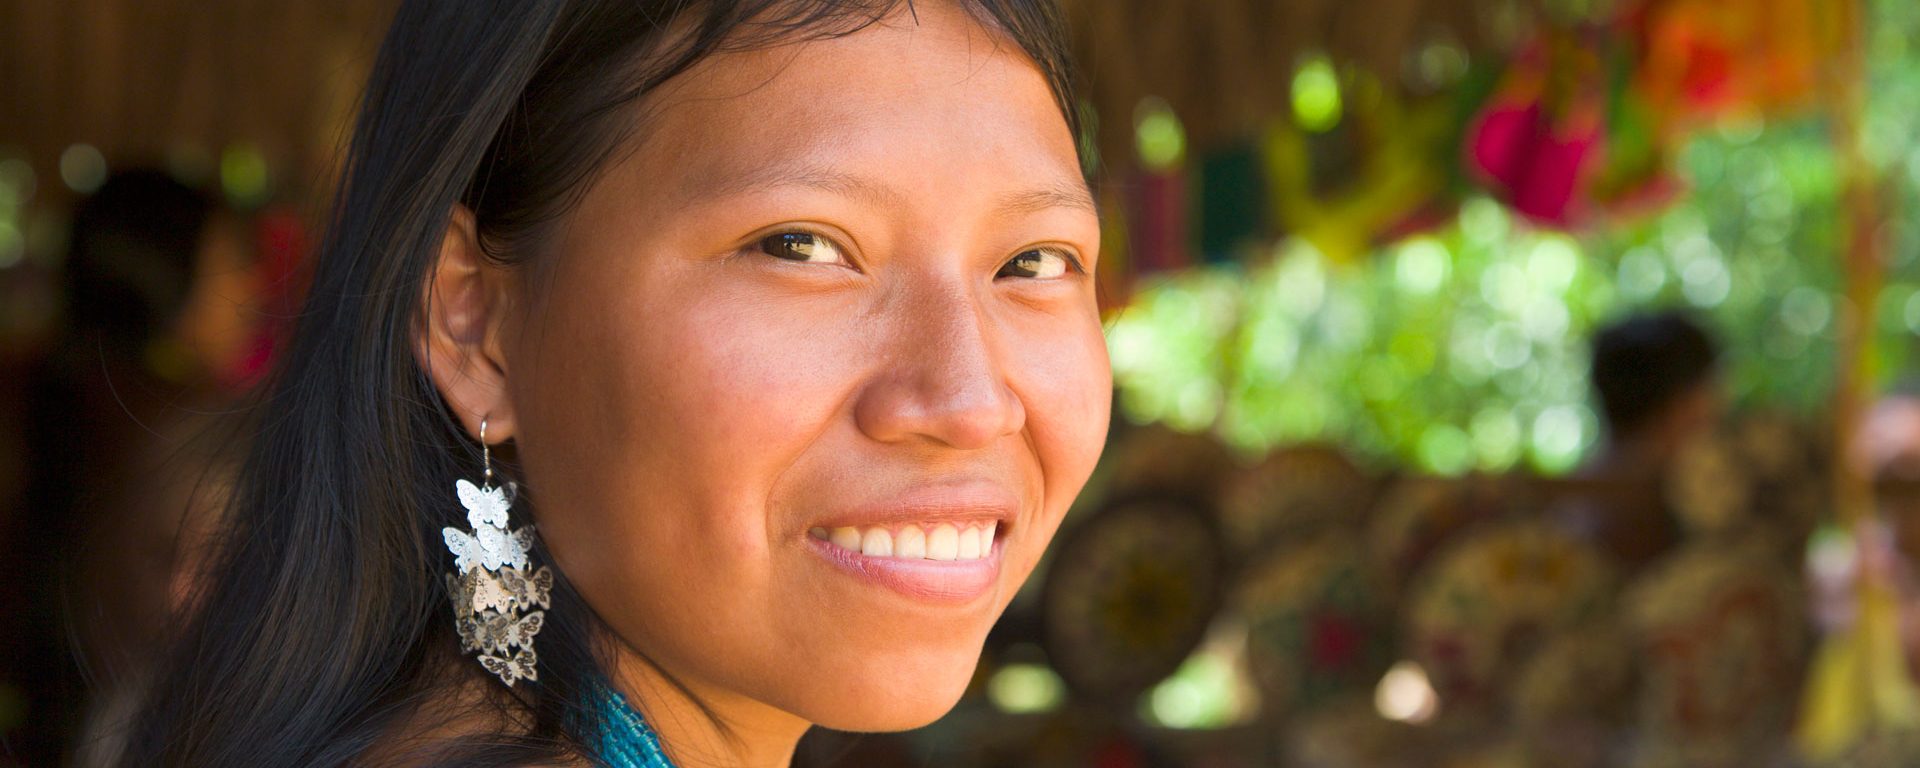 Woman of the native Embera tribe in the village of Embera, Panama